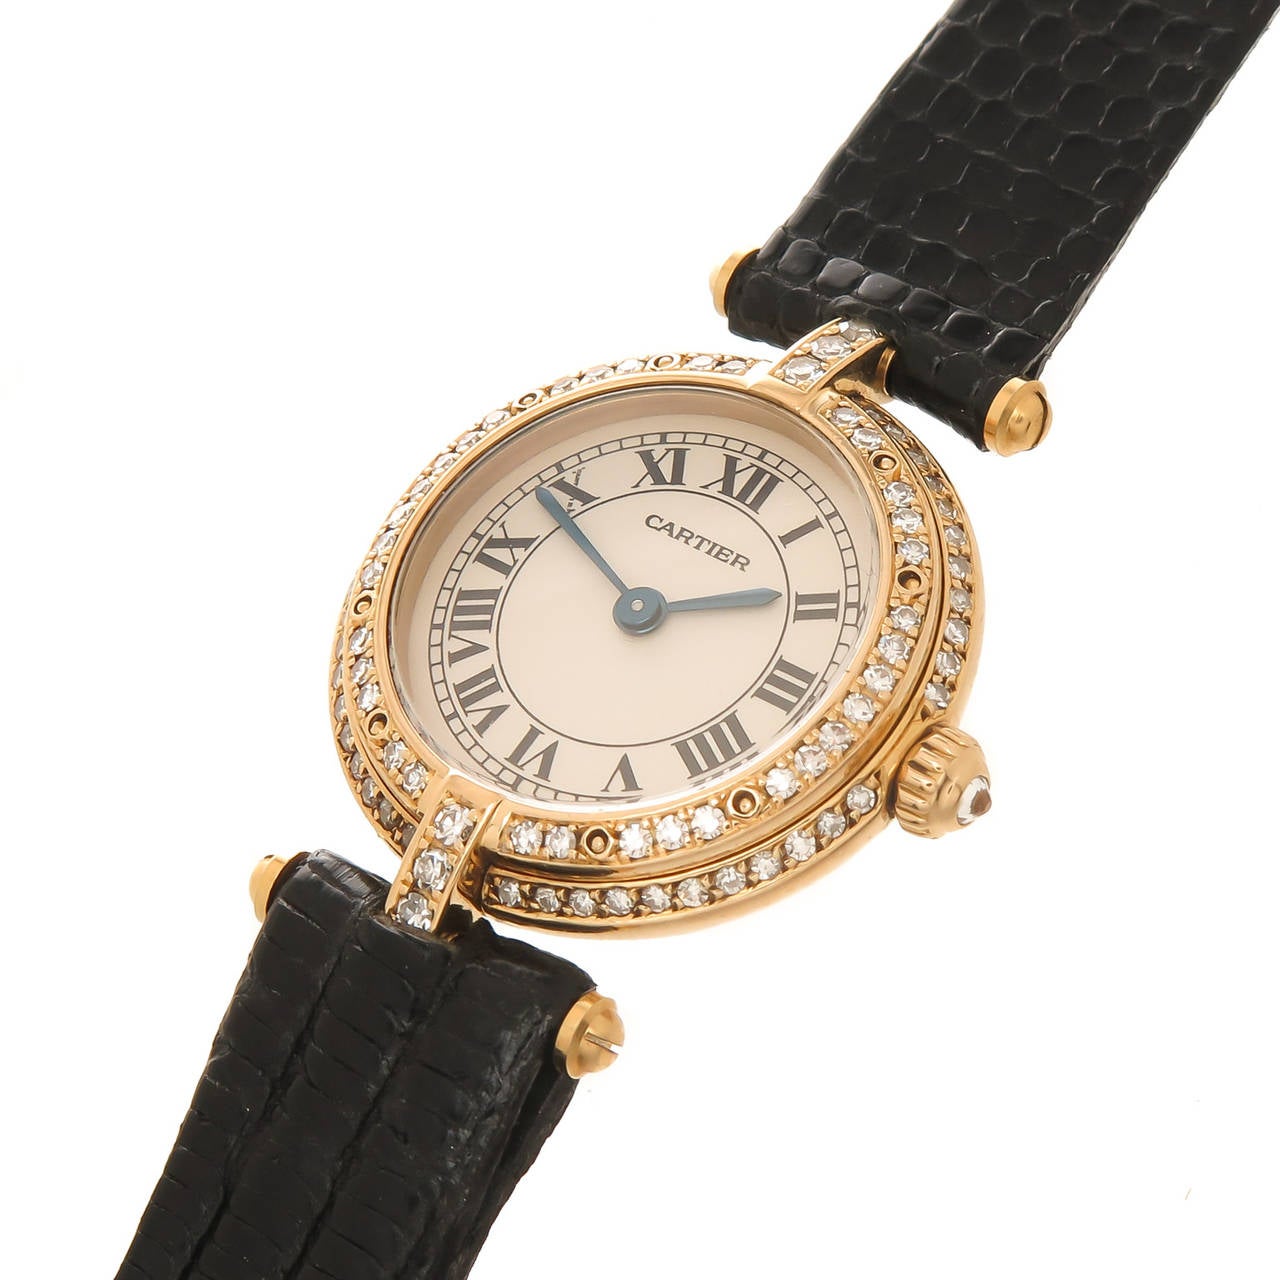 Circa 2000 Cartier Vendome ladies watch, 18K Yellow Gold with Factory set Diamond double row bezel totalling 1 carat. 24 MM water resistant case, quartz movement, white dial with Black Roman numerals and a Diamond set Crown. New Black Lizard strap.